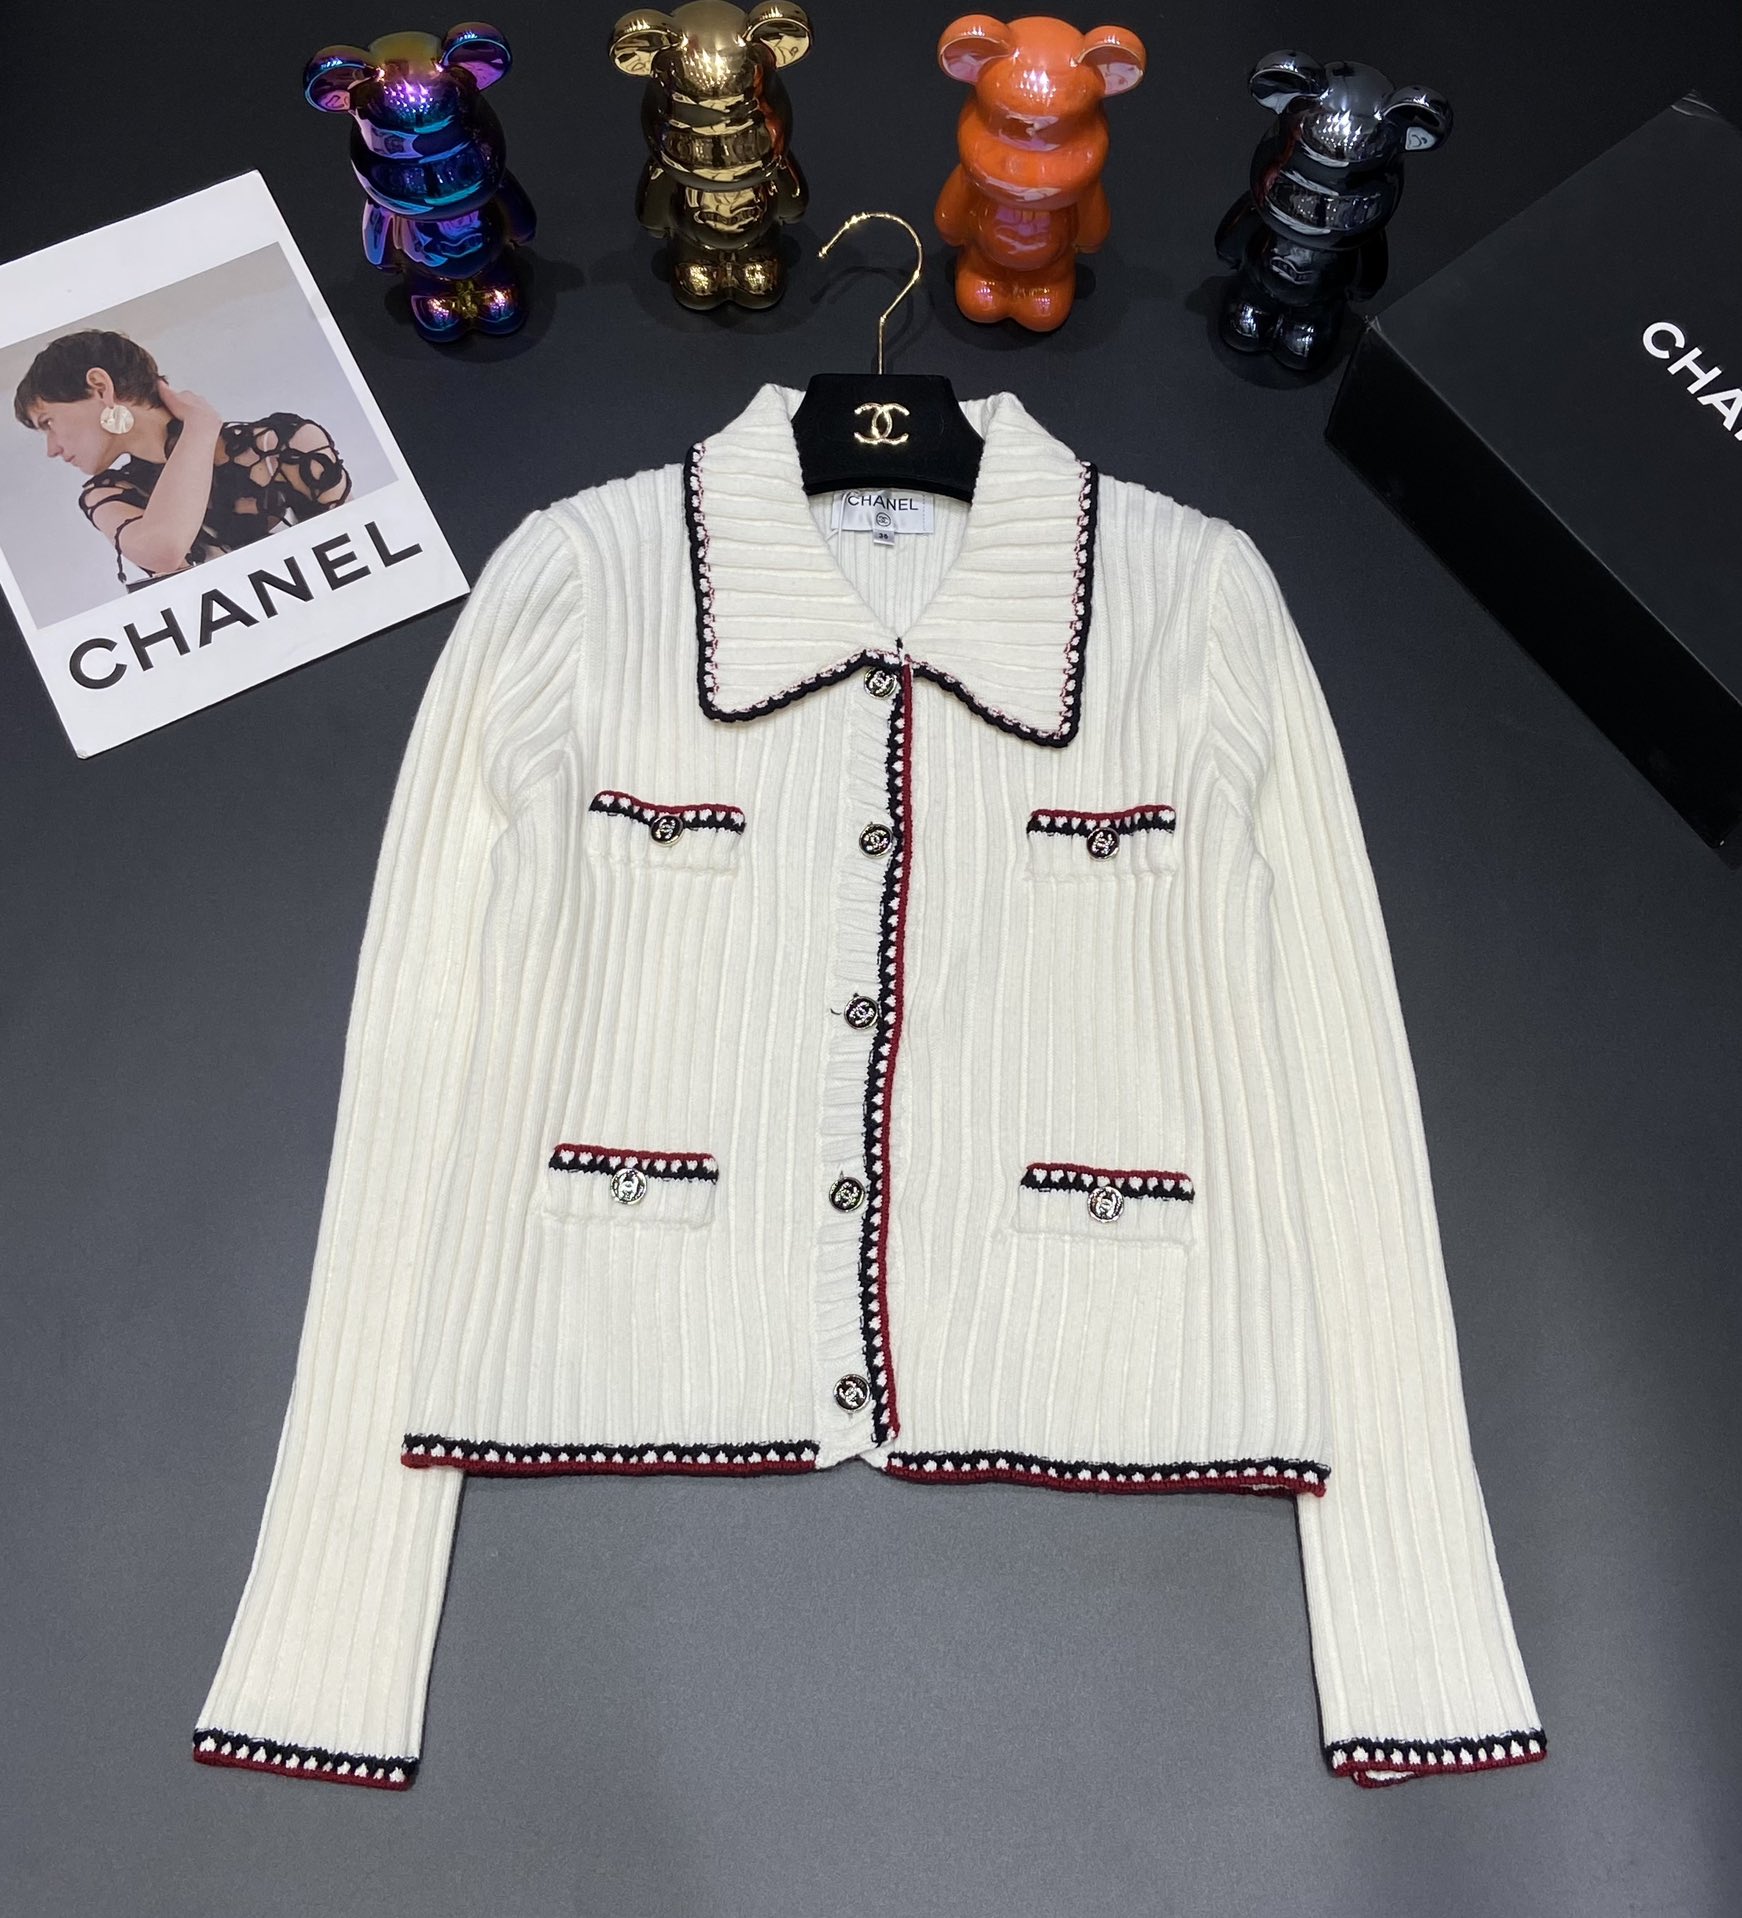 Chanel Clothing Polo Sweatshirts Fall/Winter Collection